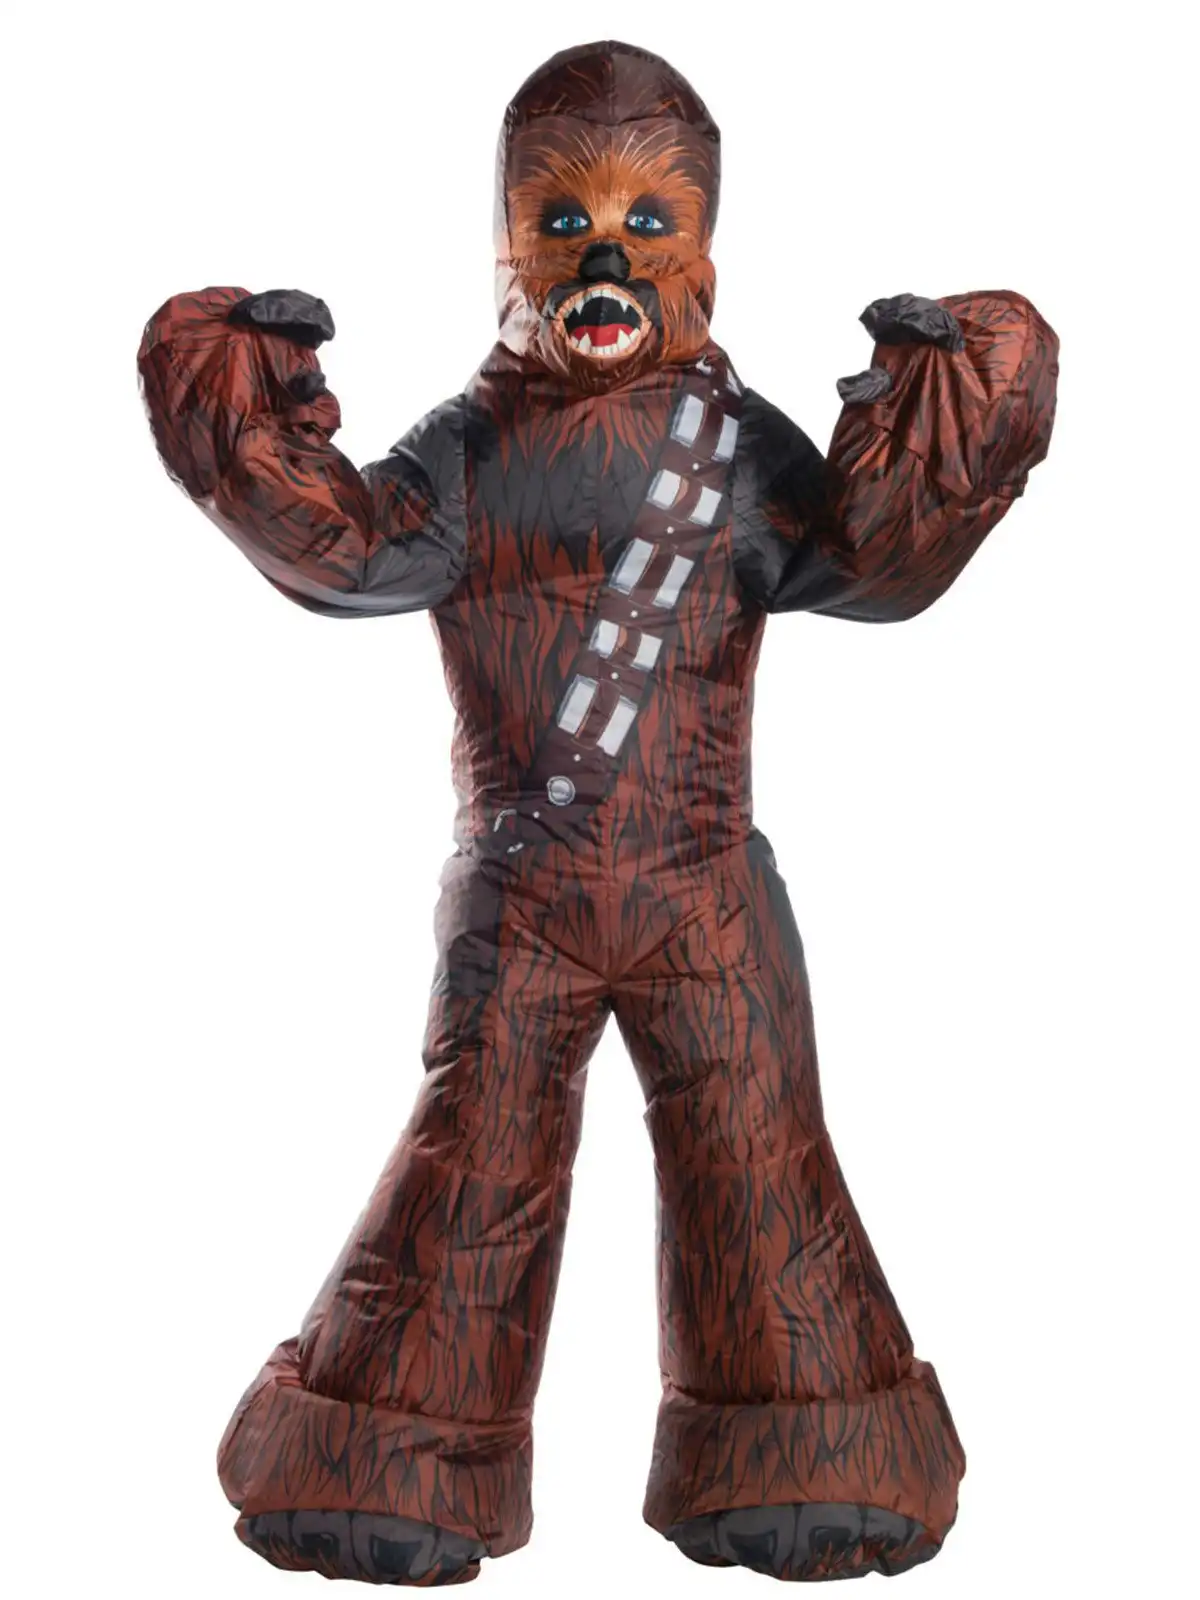 Star Wars Chewbacca Inflatable Men's Adult Dress Up Party Costume Set Size STD